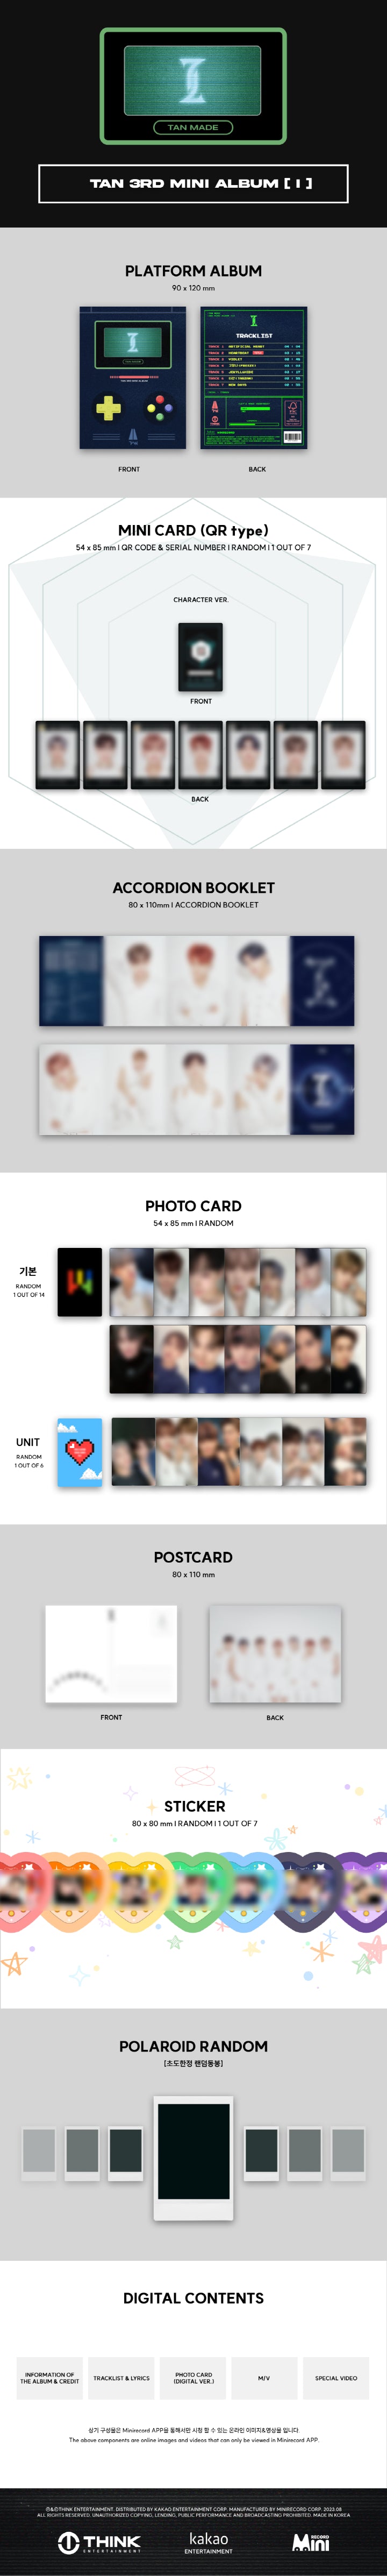 1 Mini Card (QR Type, random out of 7 types)
1 Accordion Booklet
2 Photo Cards (random out of 20 types)
1 Postcard
1 Stick...